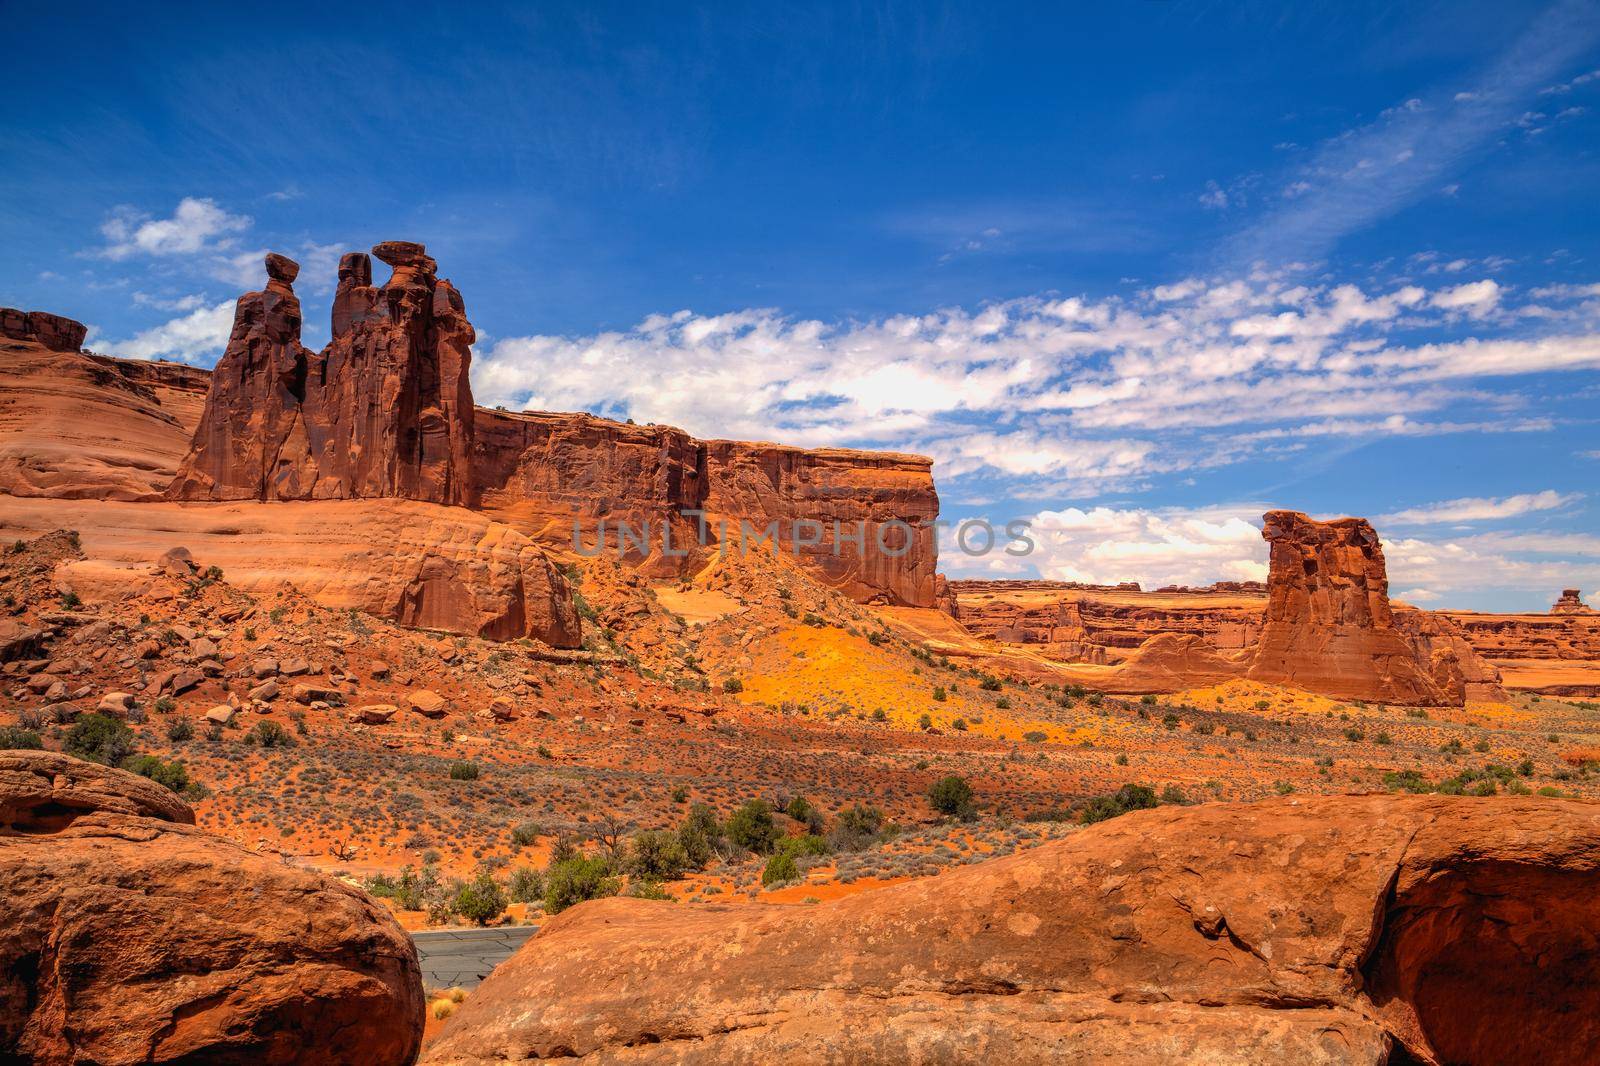 Arches National Park, Moab,Utah,USA.   by CaptureLight